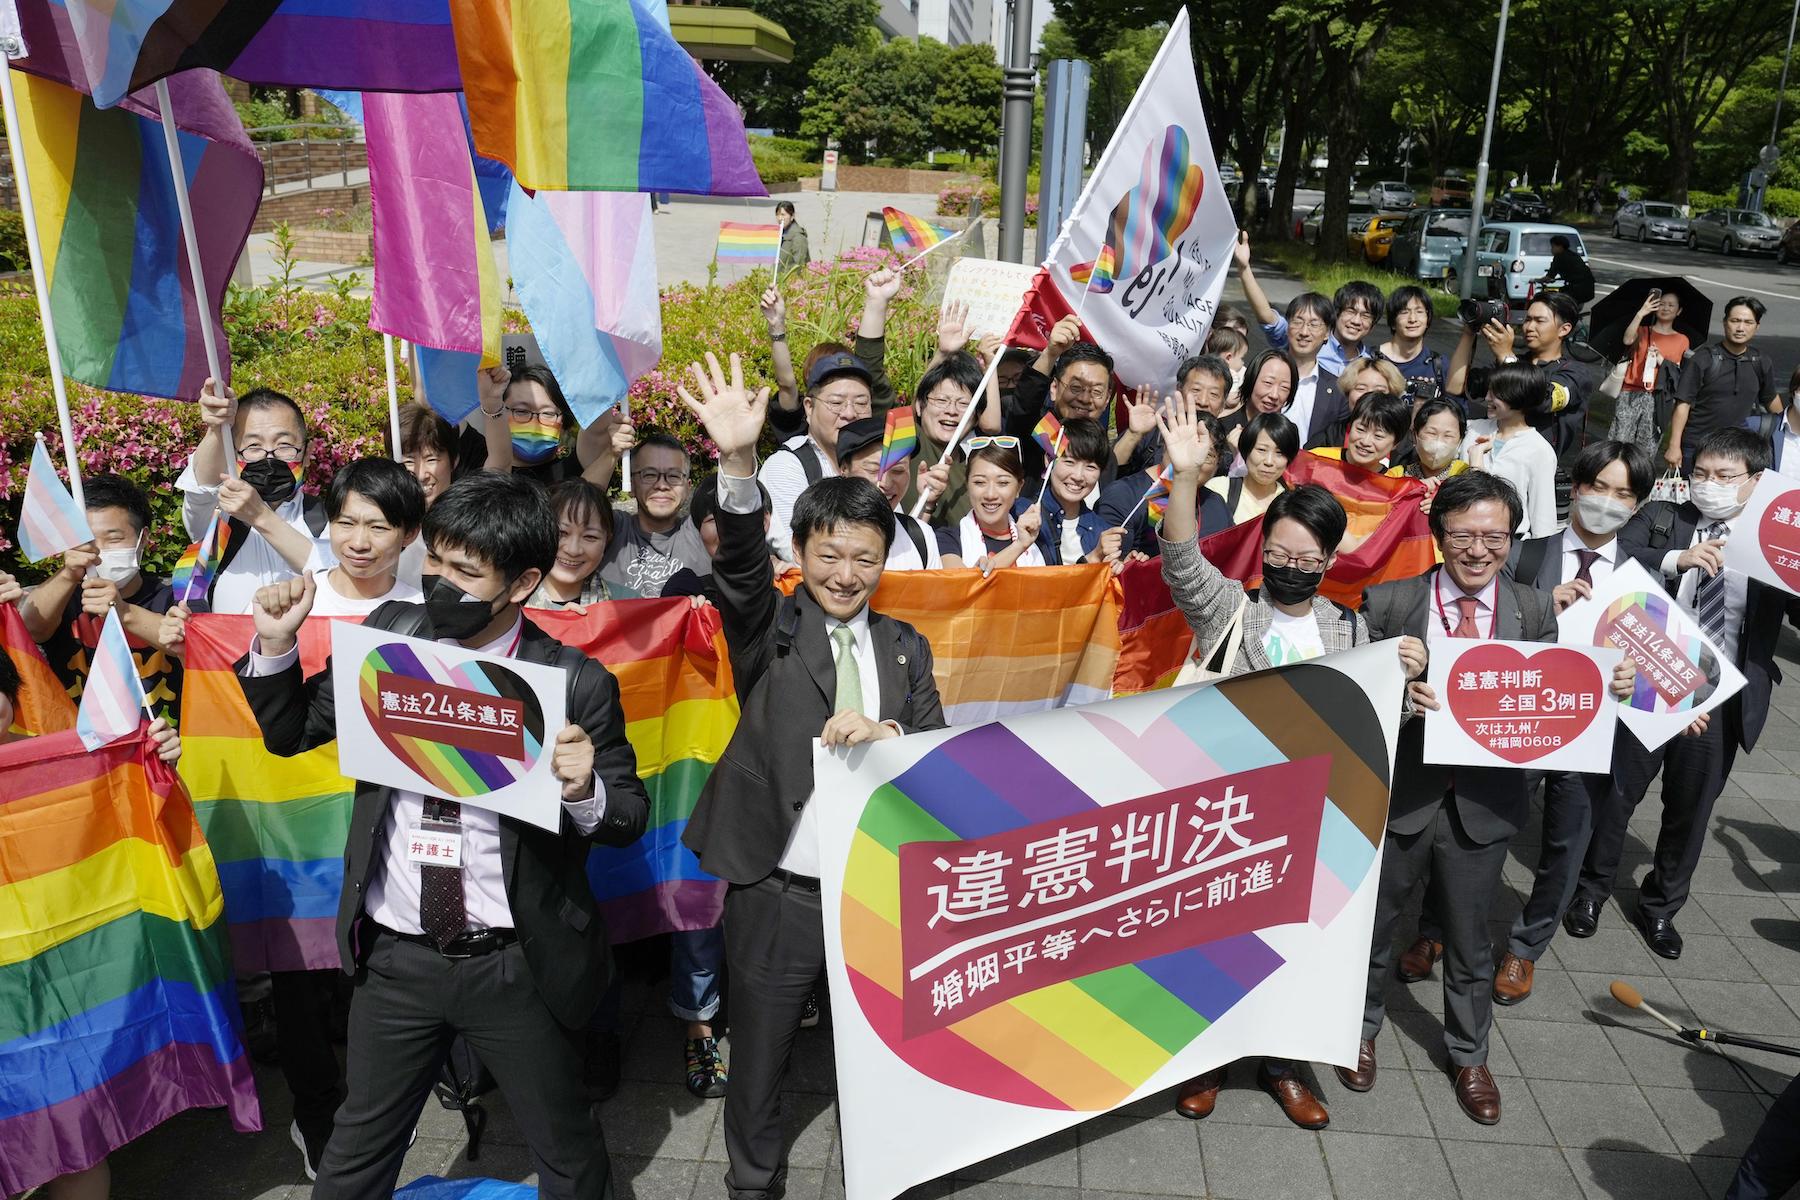 Japan’s Ban On Same-Sex Marriage Has Been Found To Be Unconstitutional By A High Court For The First Time